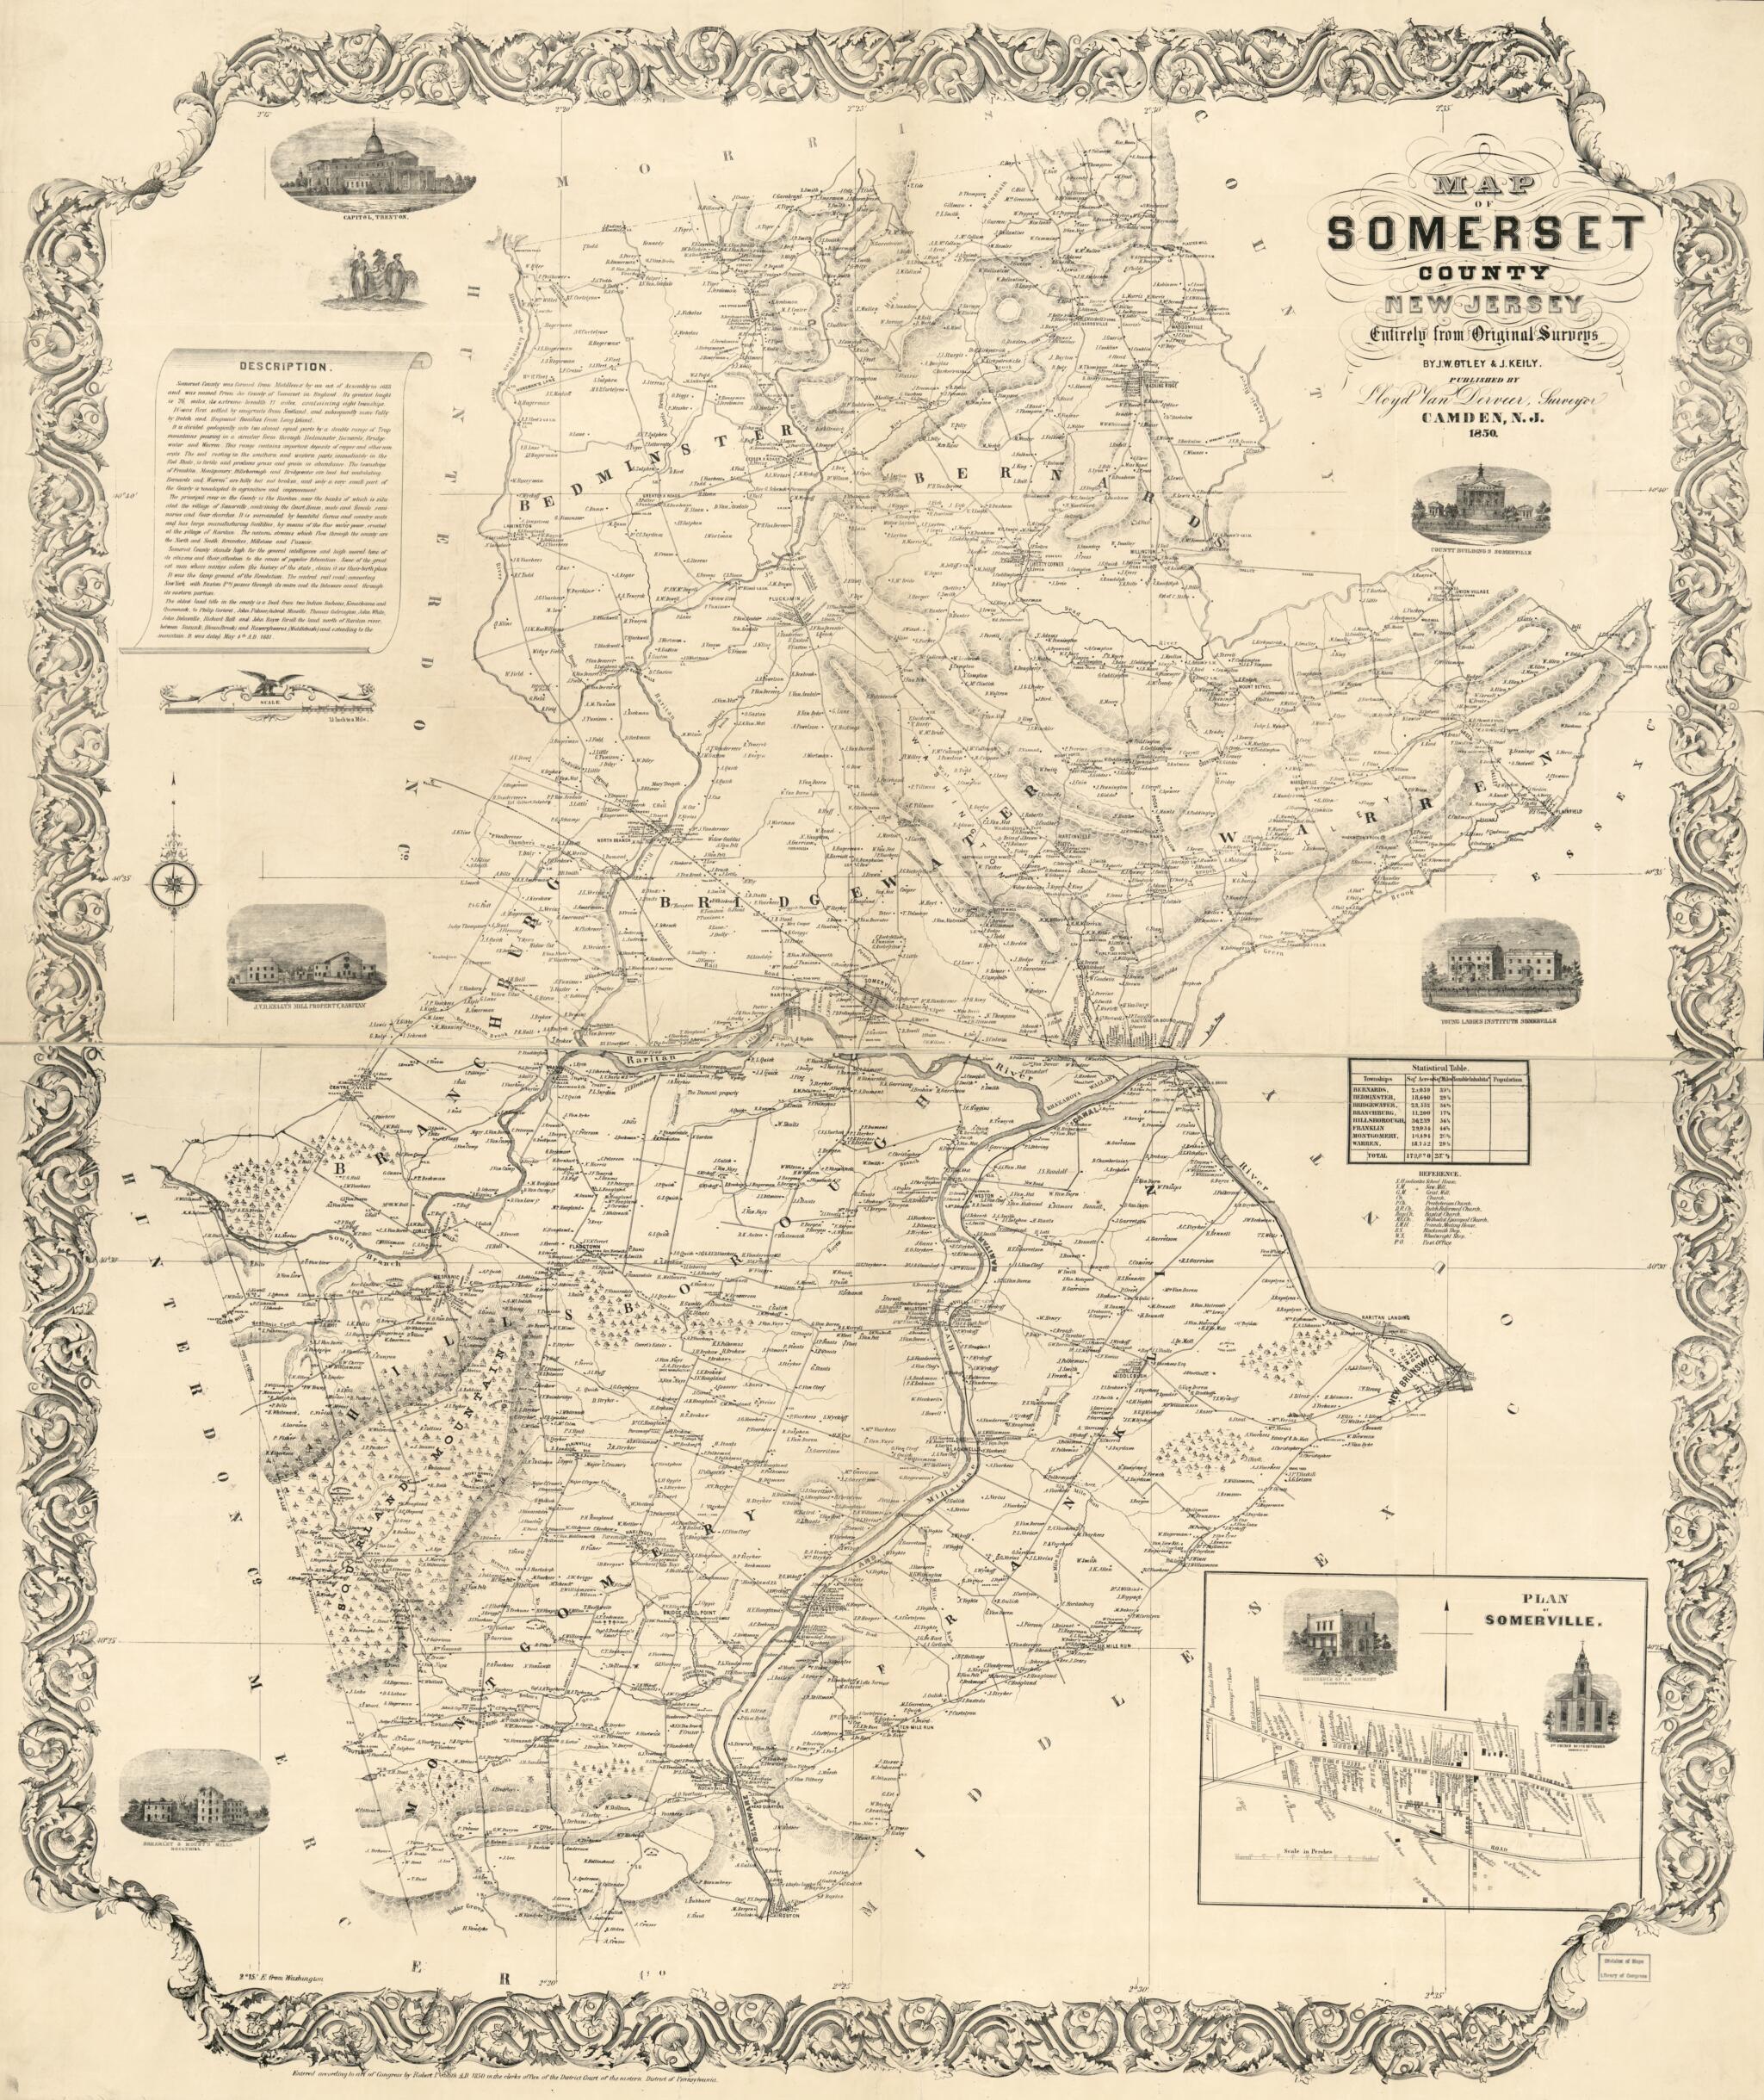 This old map of Map of Somerset County, New Jersey : Entirely from Original Surveys from 1850 was created by James Keily, J. W. Otley, Robert Pearsall Smith, Lloyd Van Derveer in 1850